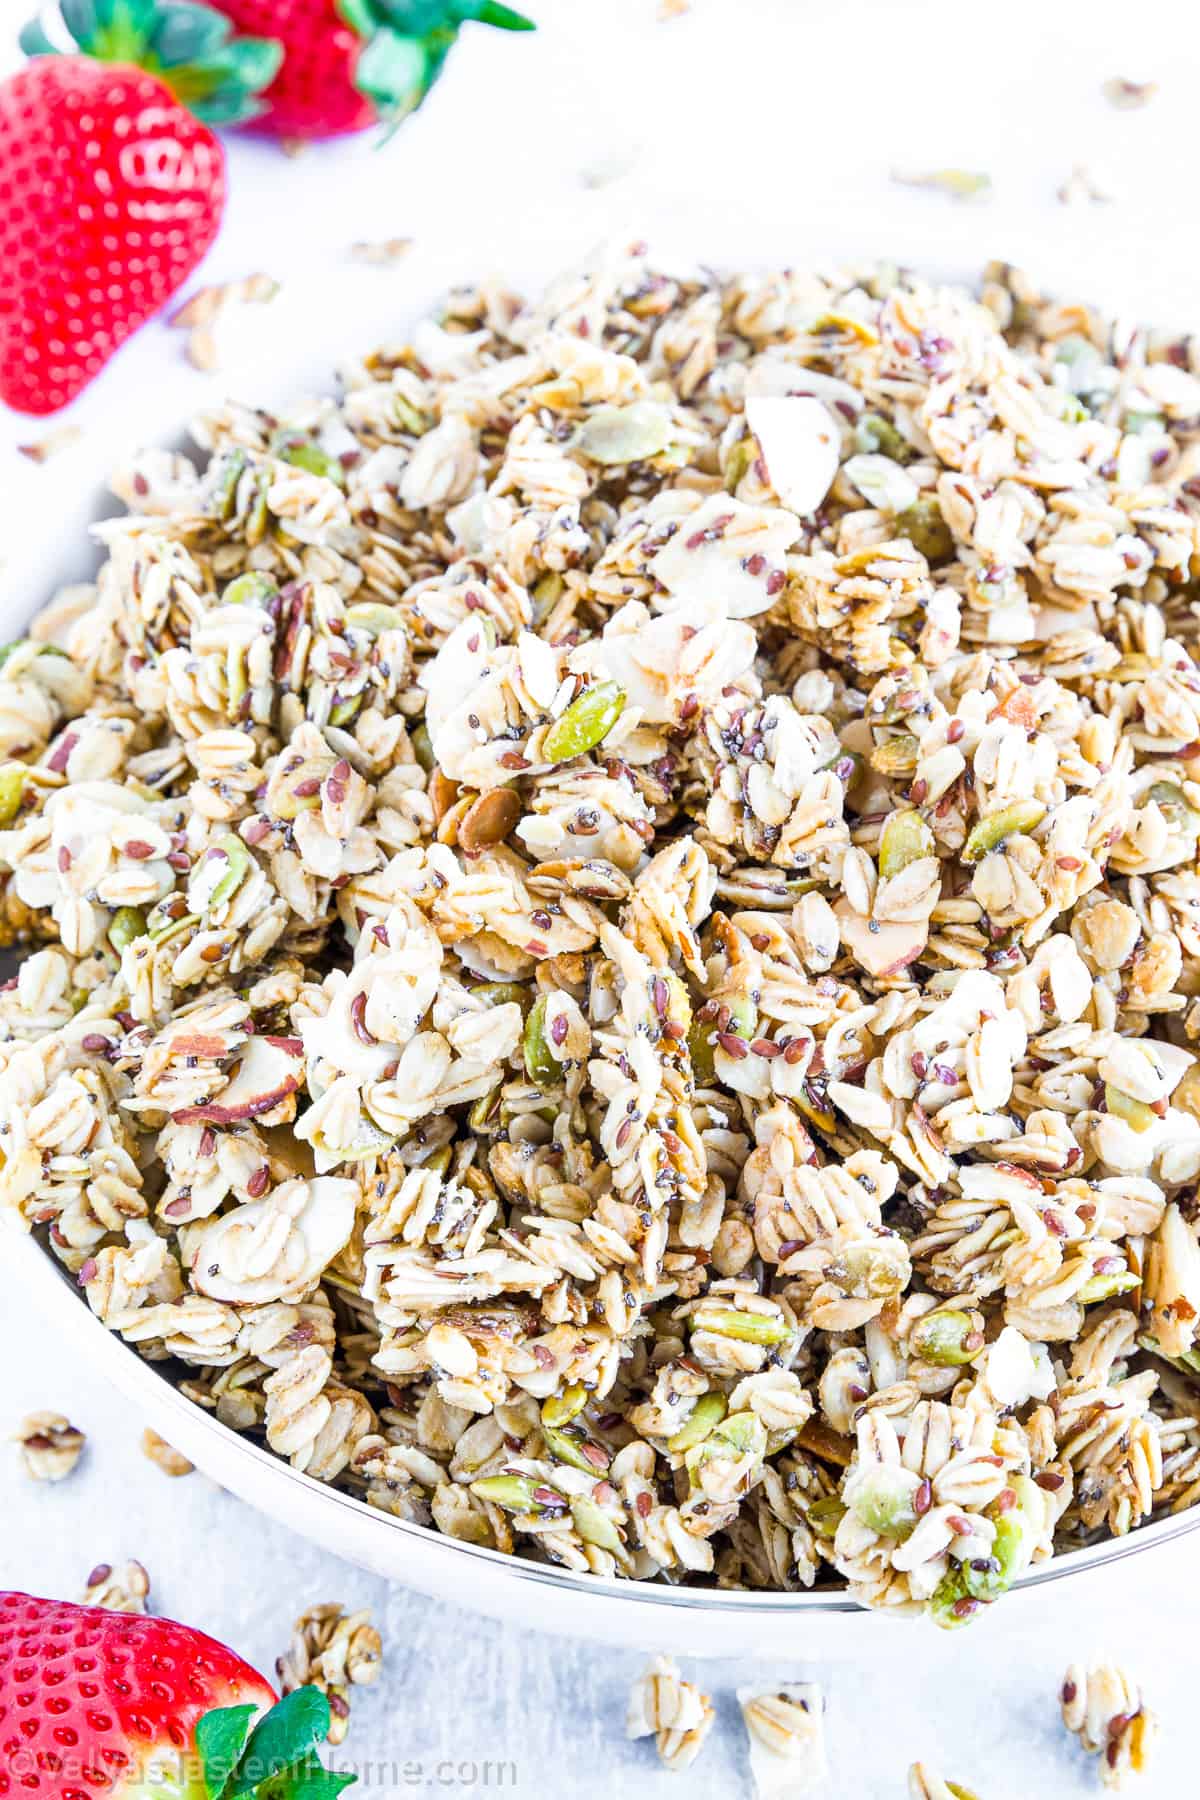 With a simple list of ingredients and straightforward steps, you'll have a delicious granola ready in no time.